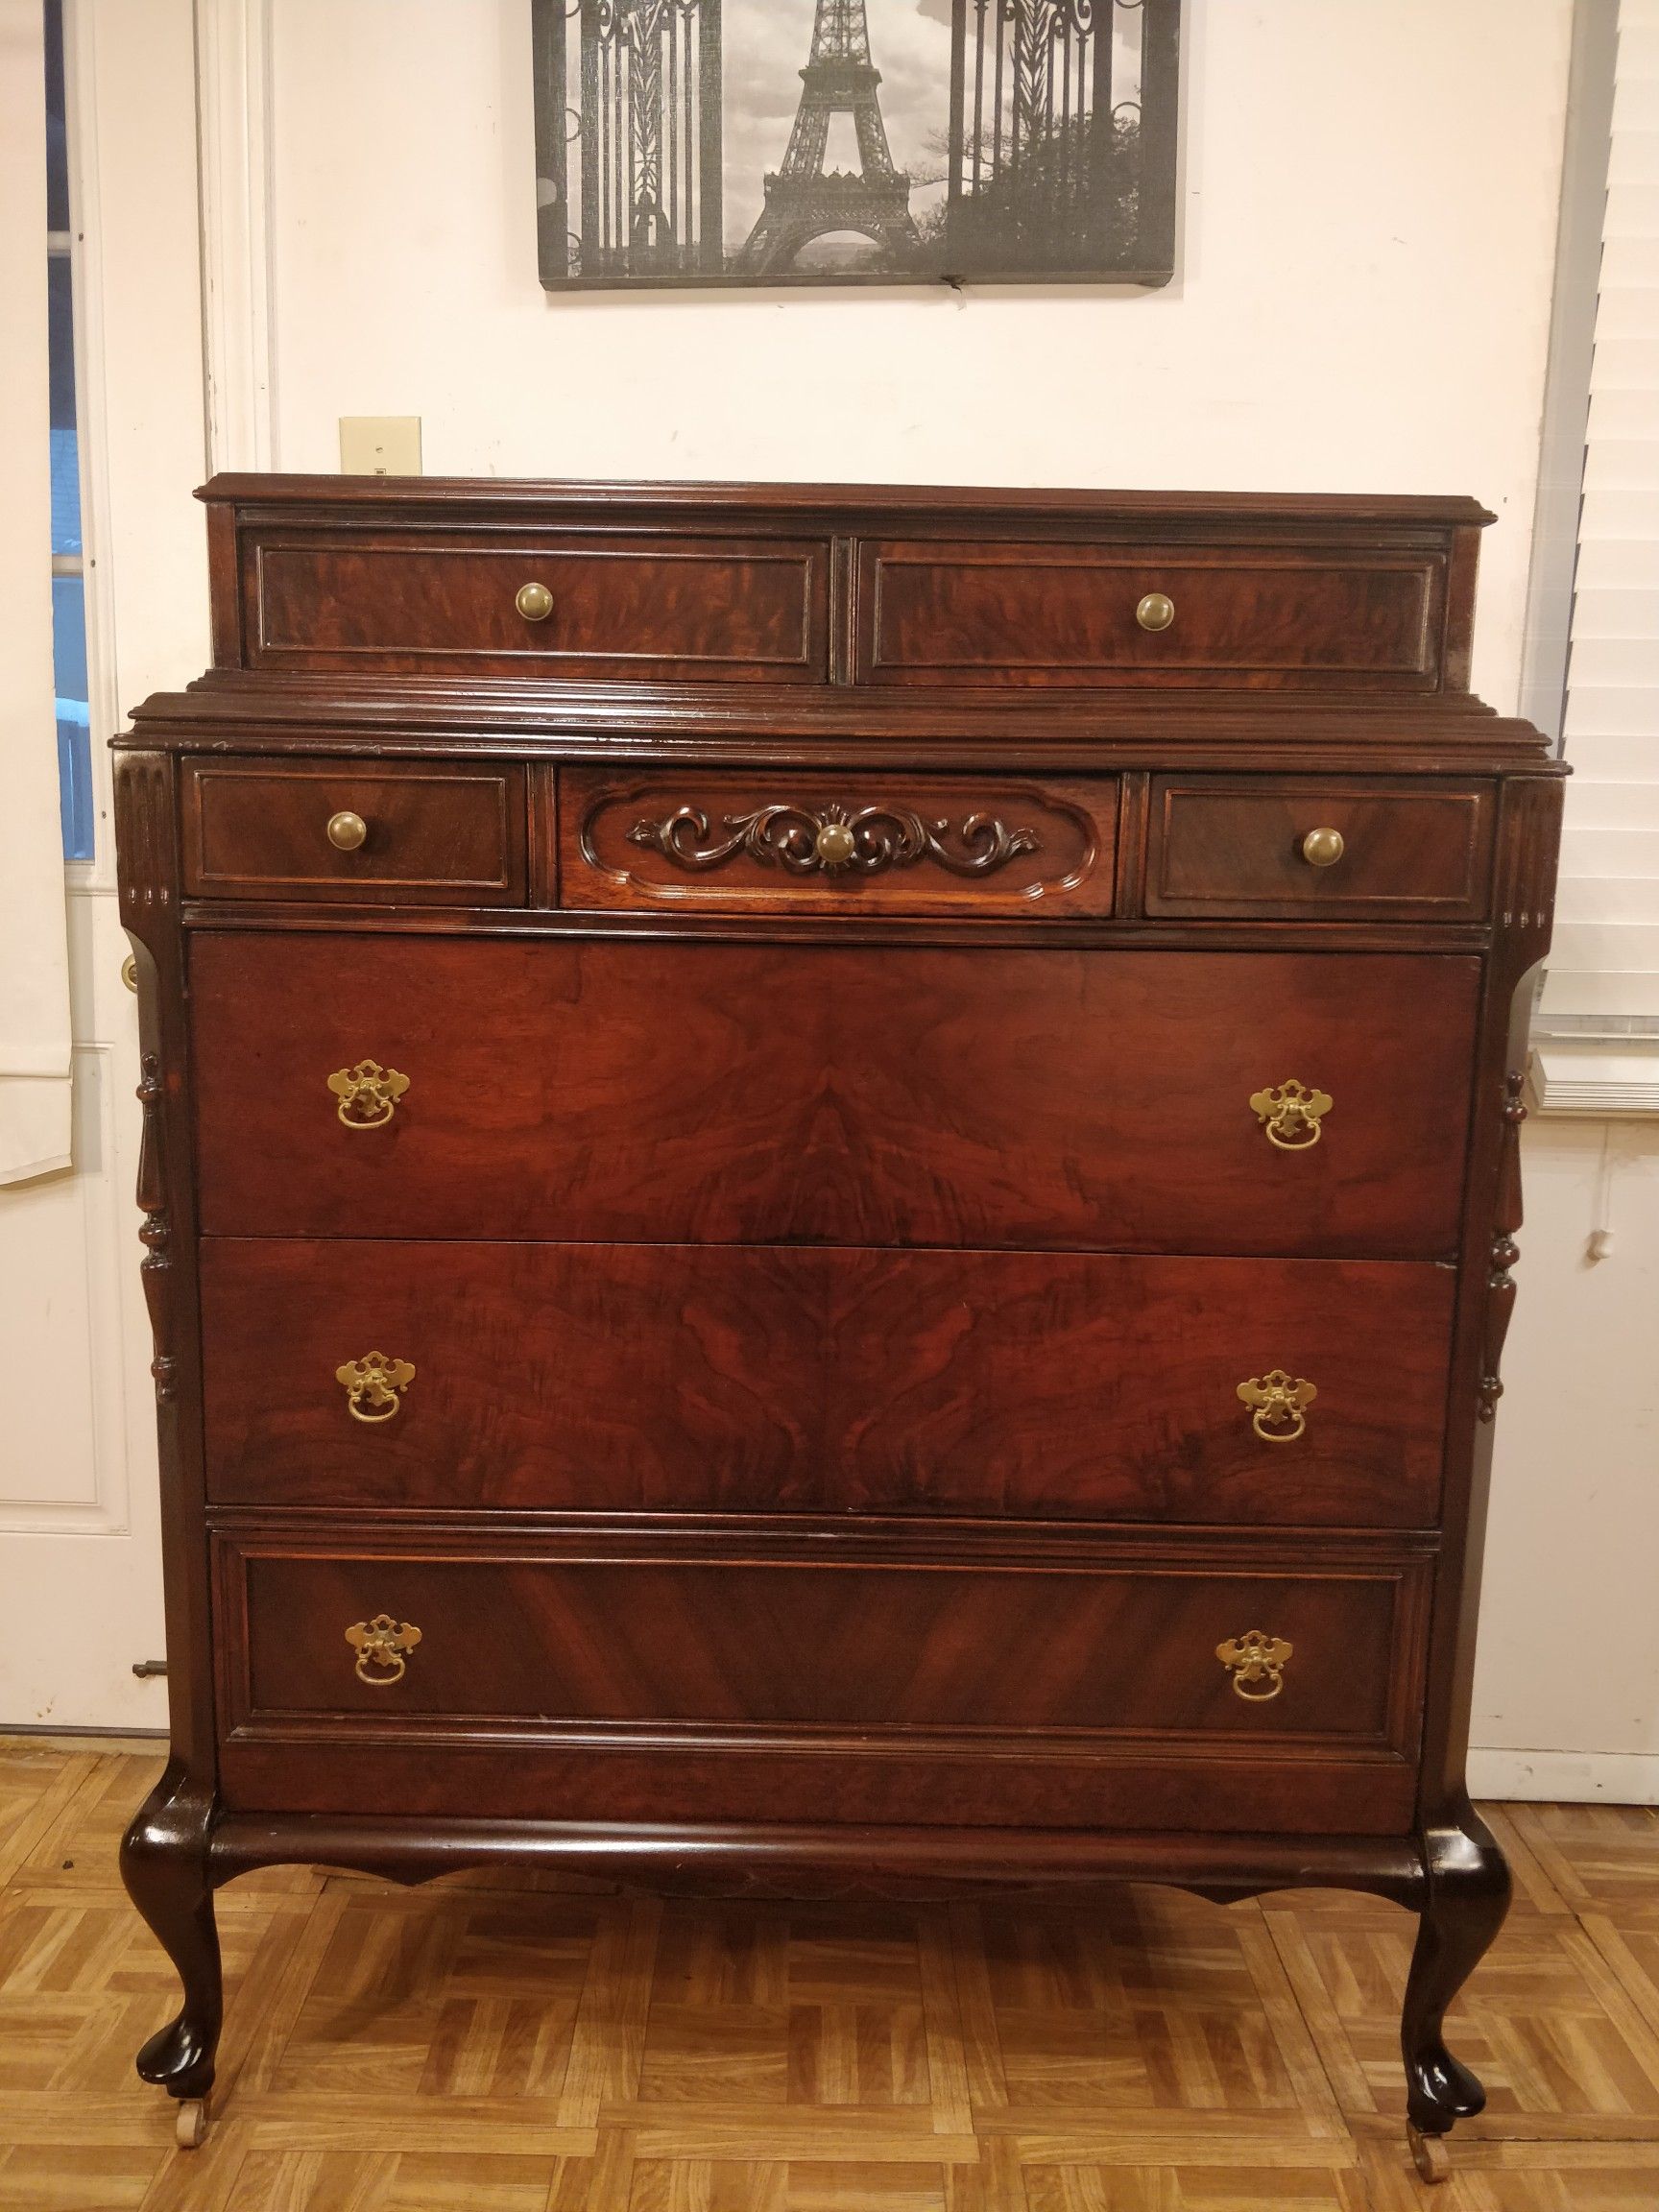 Nice solid wood chest dresser with 8 drawers in very good condition, all drawers sliding smoothly. L40"*W20"*H52"